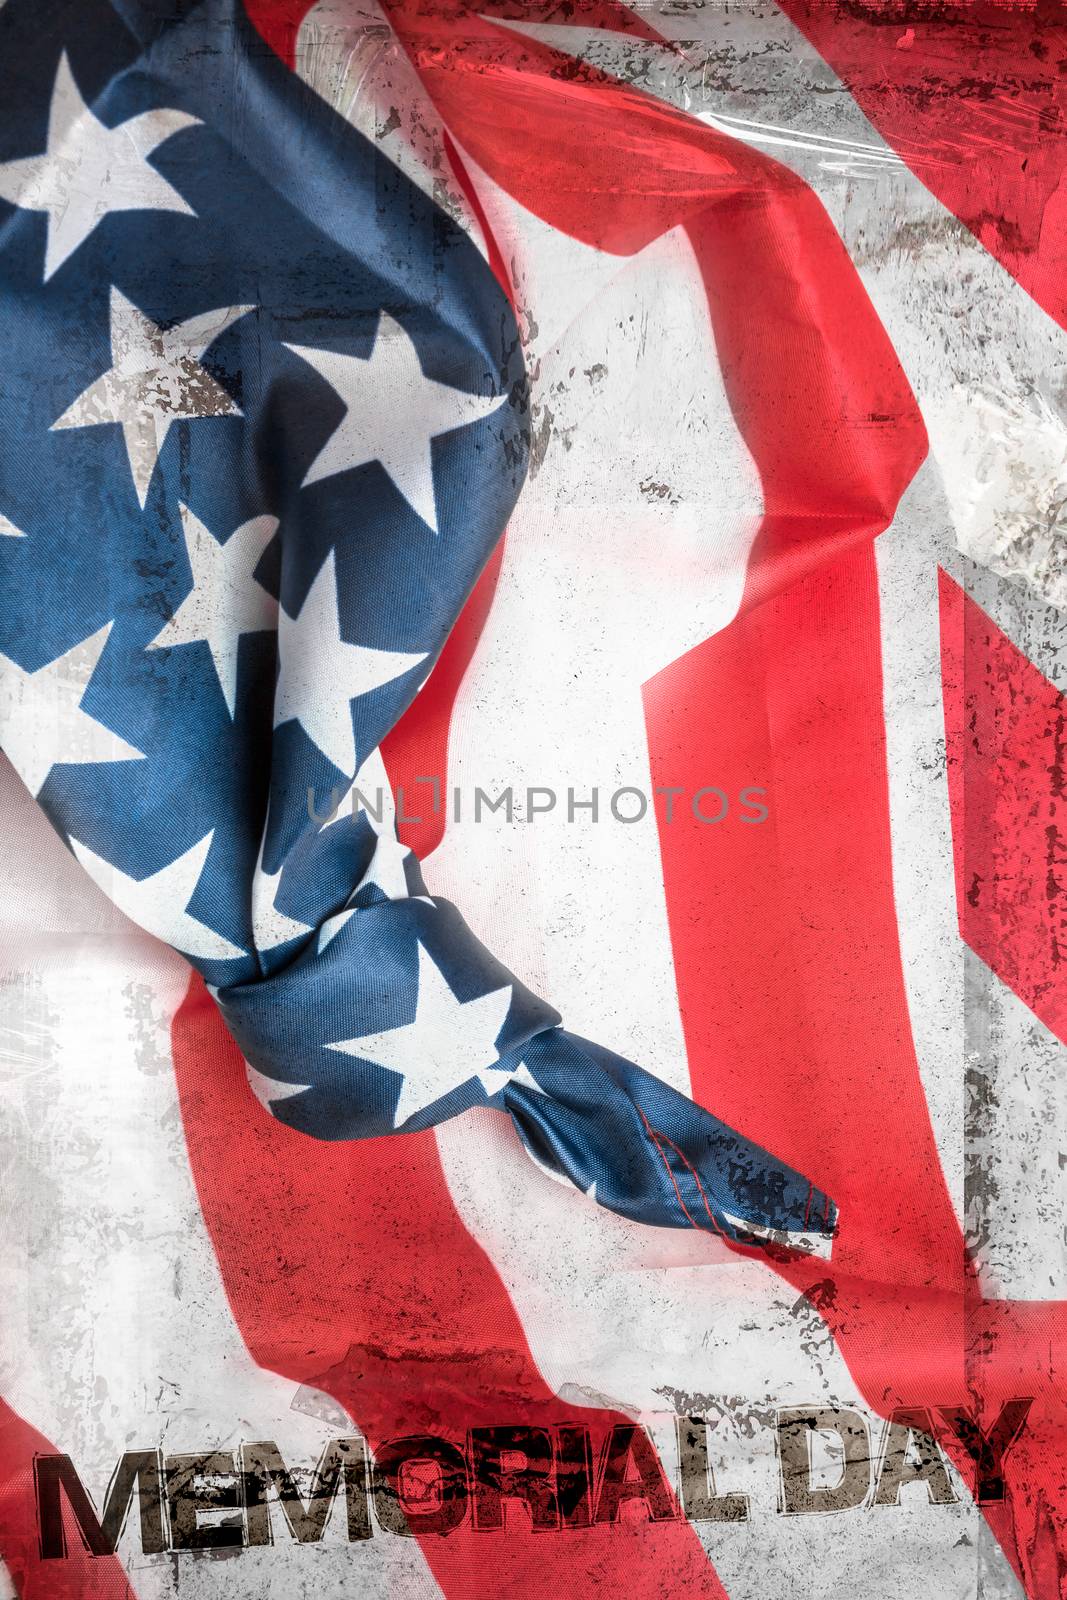 American flag with knot. Conceptual representation of an important event to remember. Save the date. Space for text. Background with old marking tapes. Grungy frame and remains of scotch tape and cellophane. It can be used as a food menu, poster, wallpaper, design t-shirts and more.